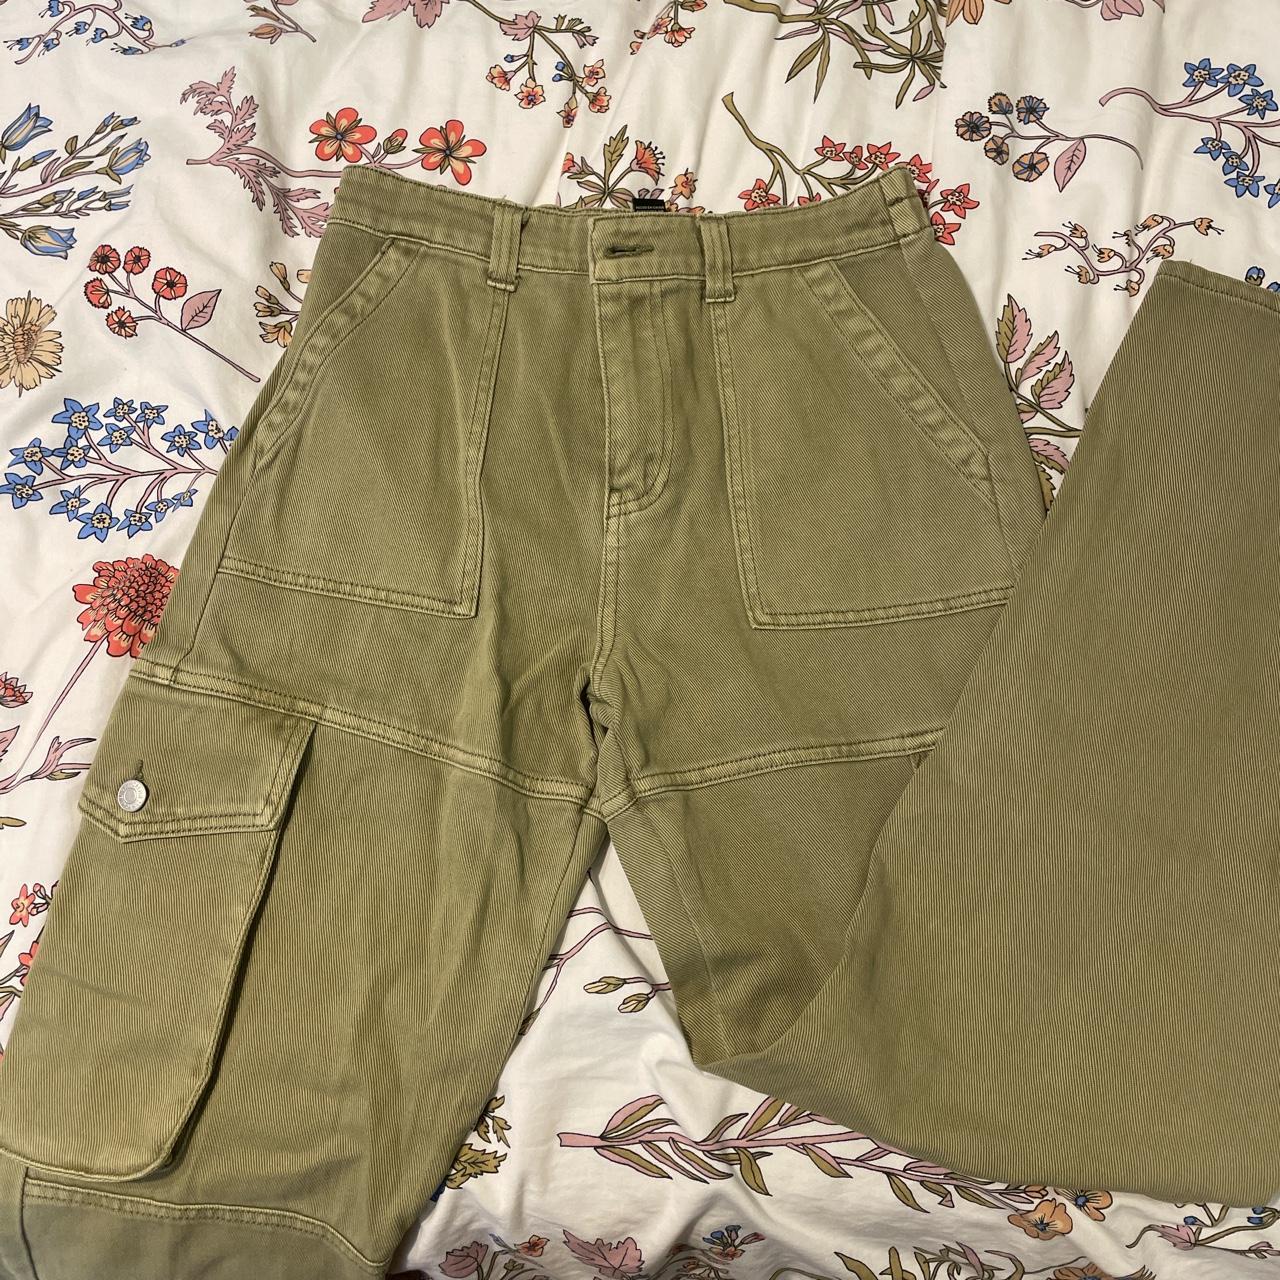 TWO pairs of cargo pants, one olive green, one light... - Depop